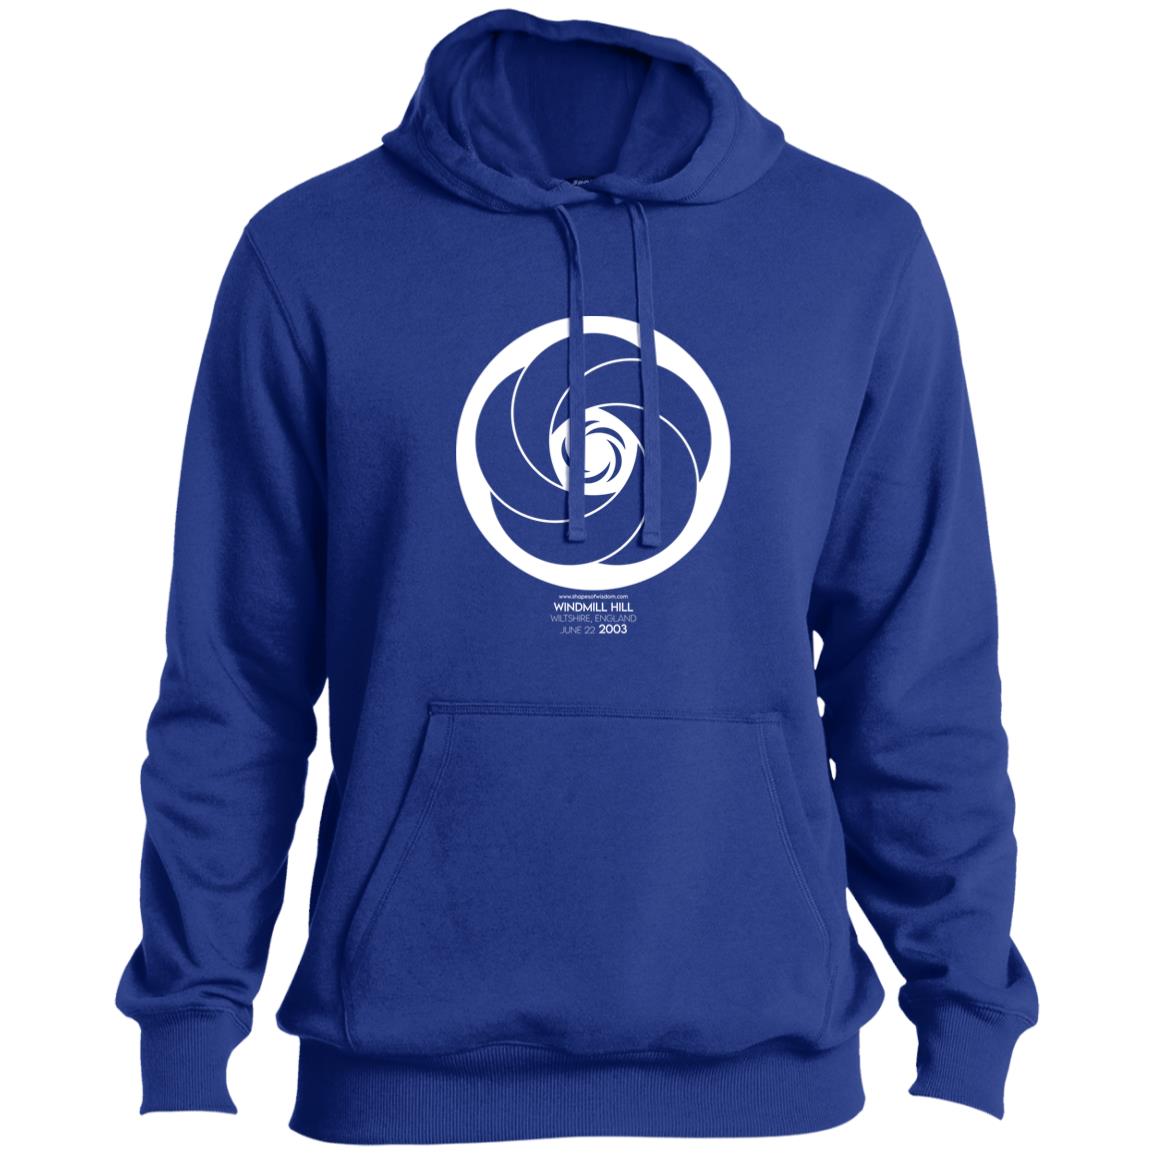 Crop Circle Pullover Hoodie - Windmill Hill 9